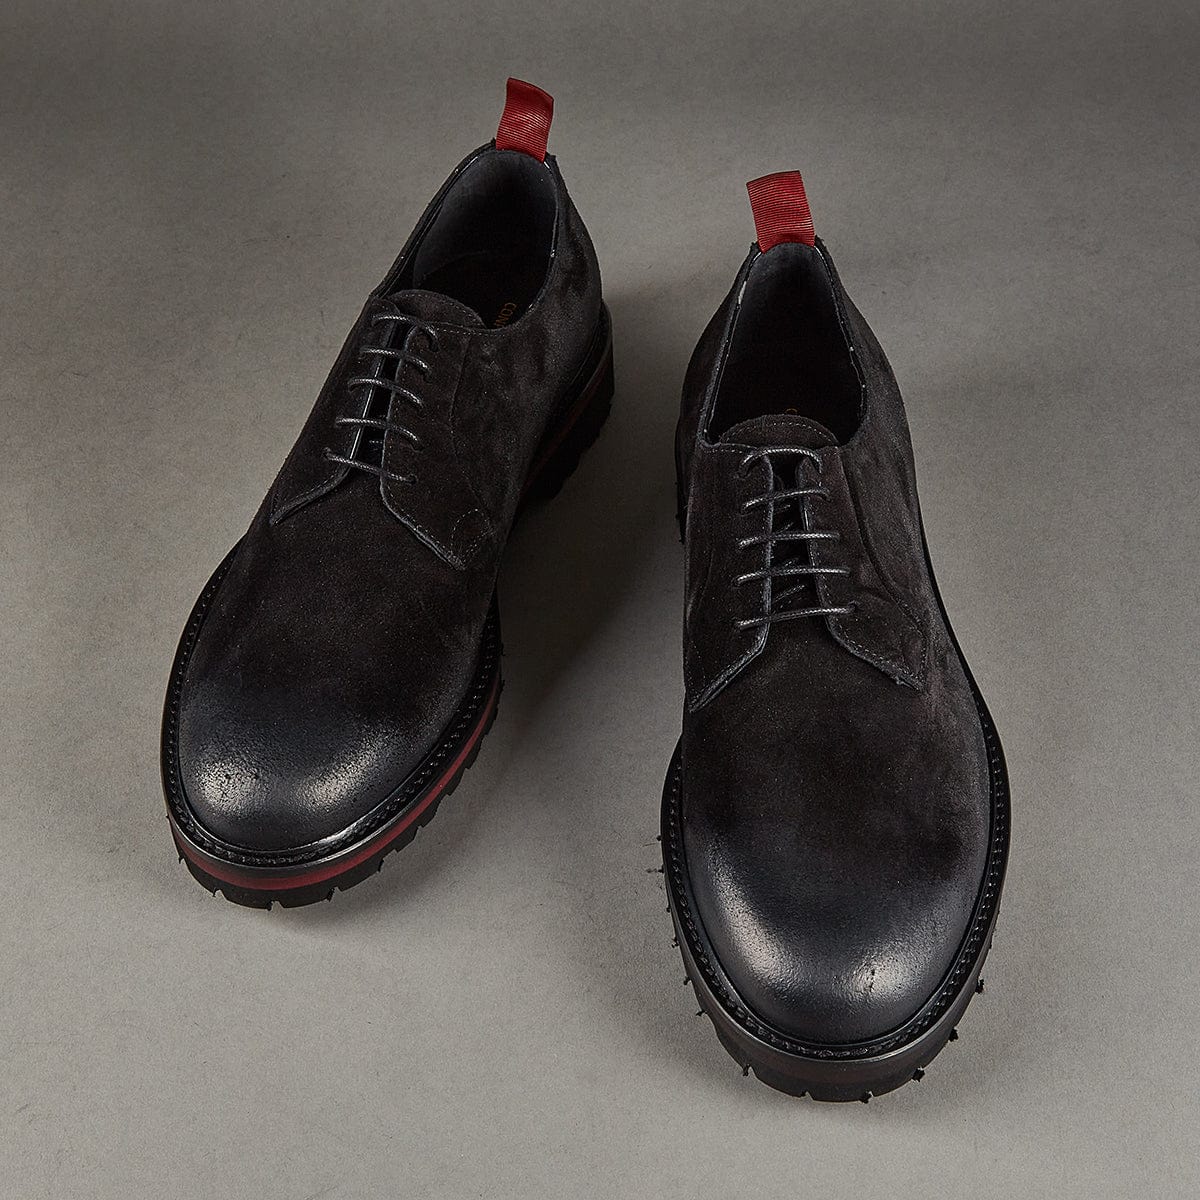 Conflict For Interest Lace Up Derby Conflict For Interest CH01 Black